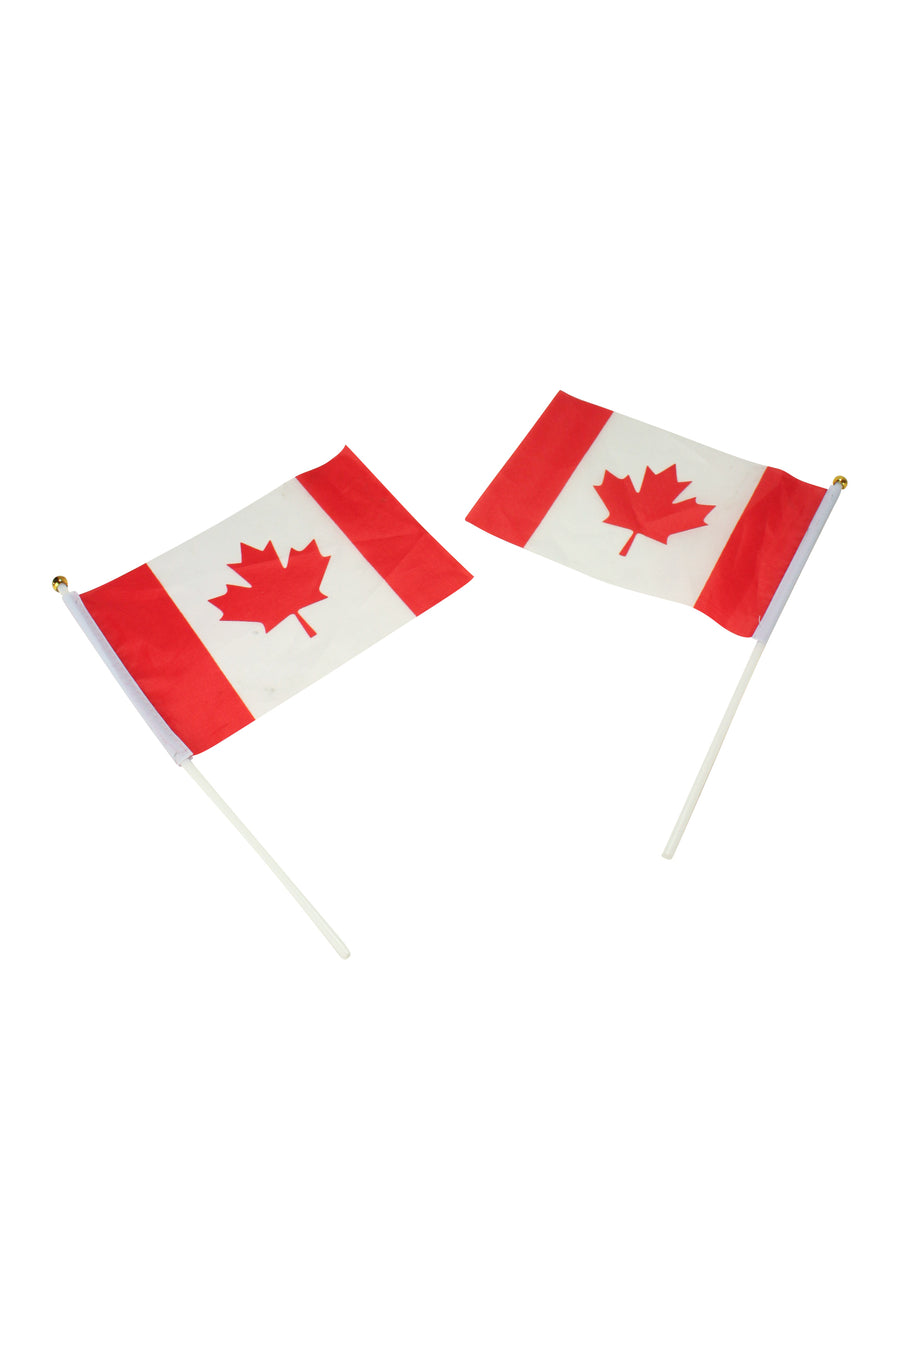 Canadian Flags (Small)